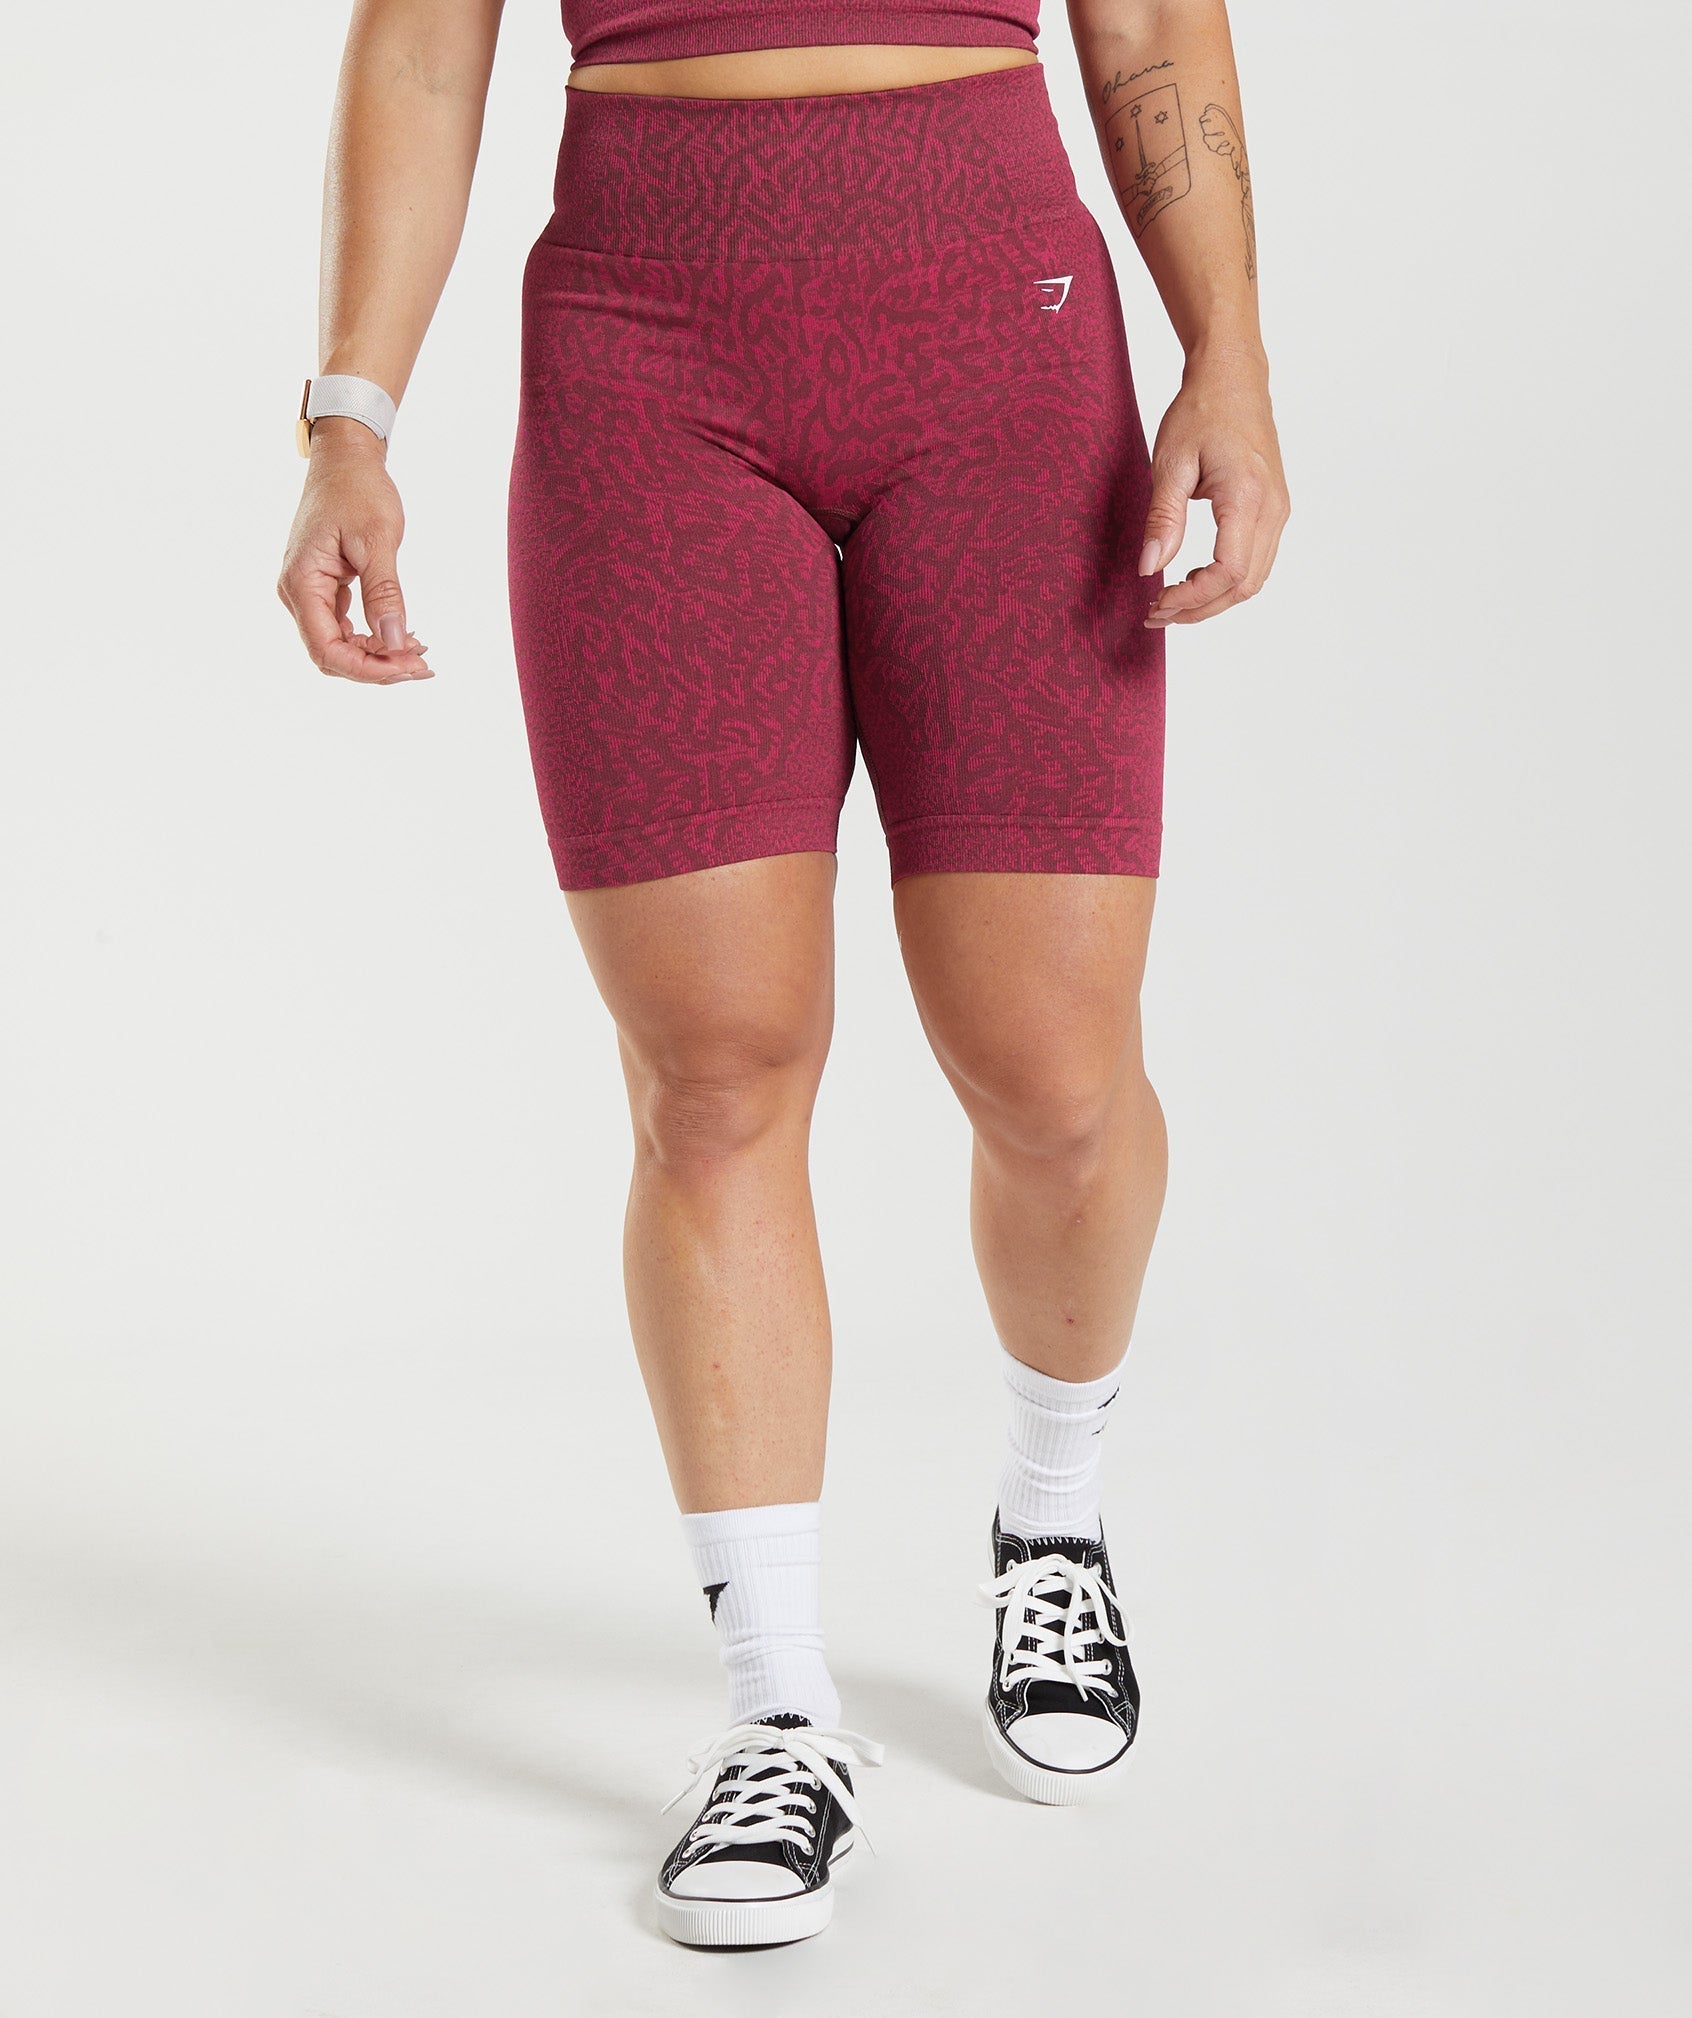 Adapt Animal Seamless Cycling Shorts in Reef | Cherry Brown